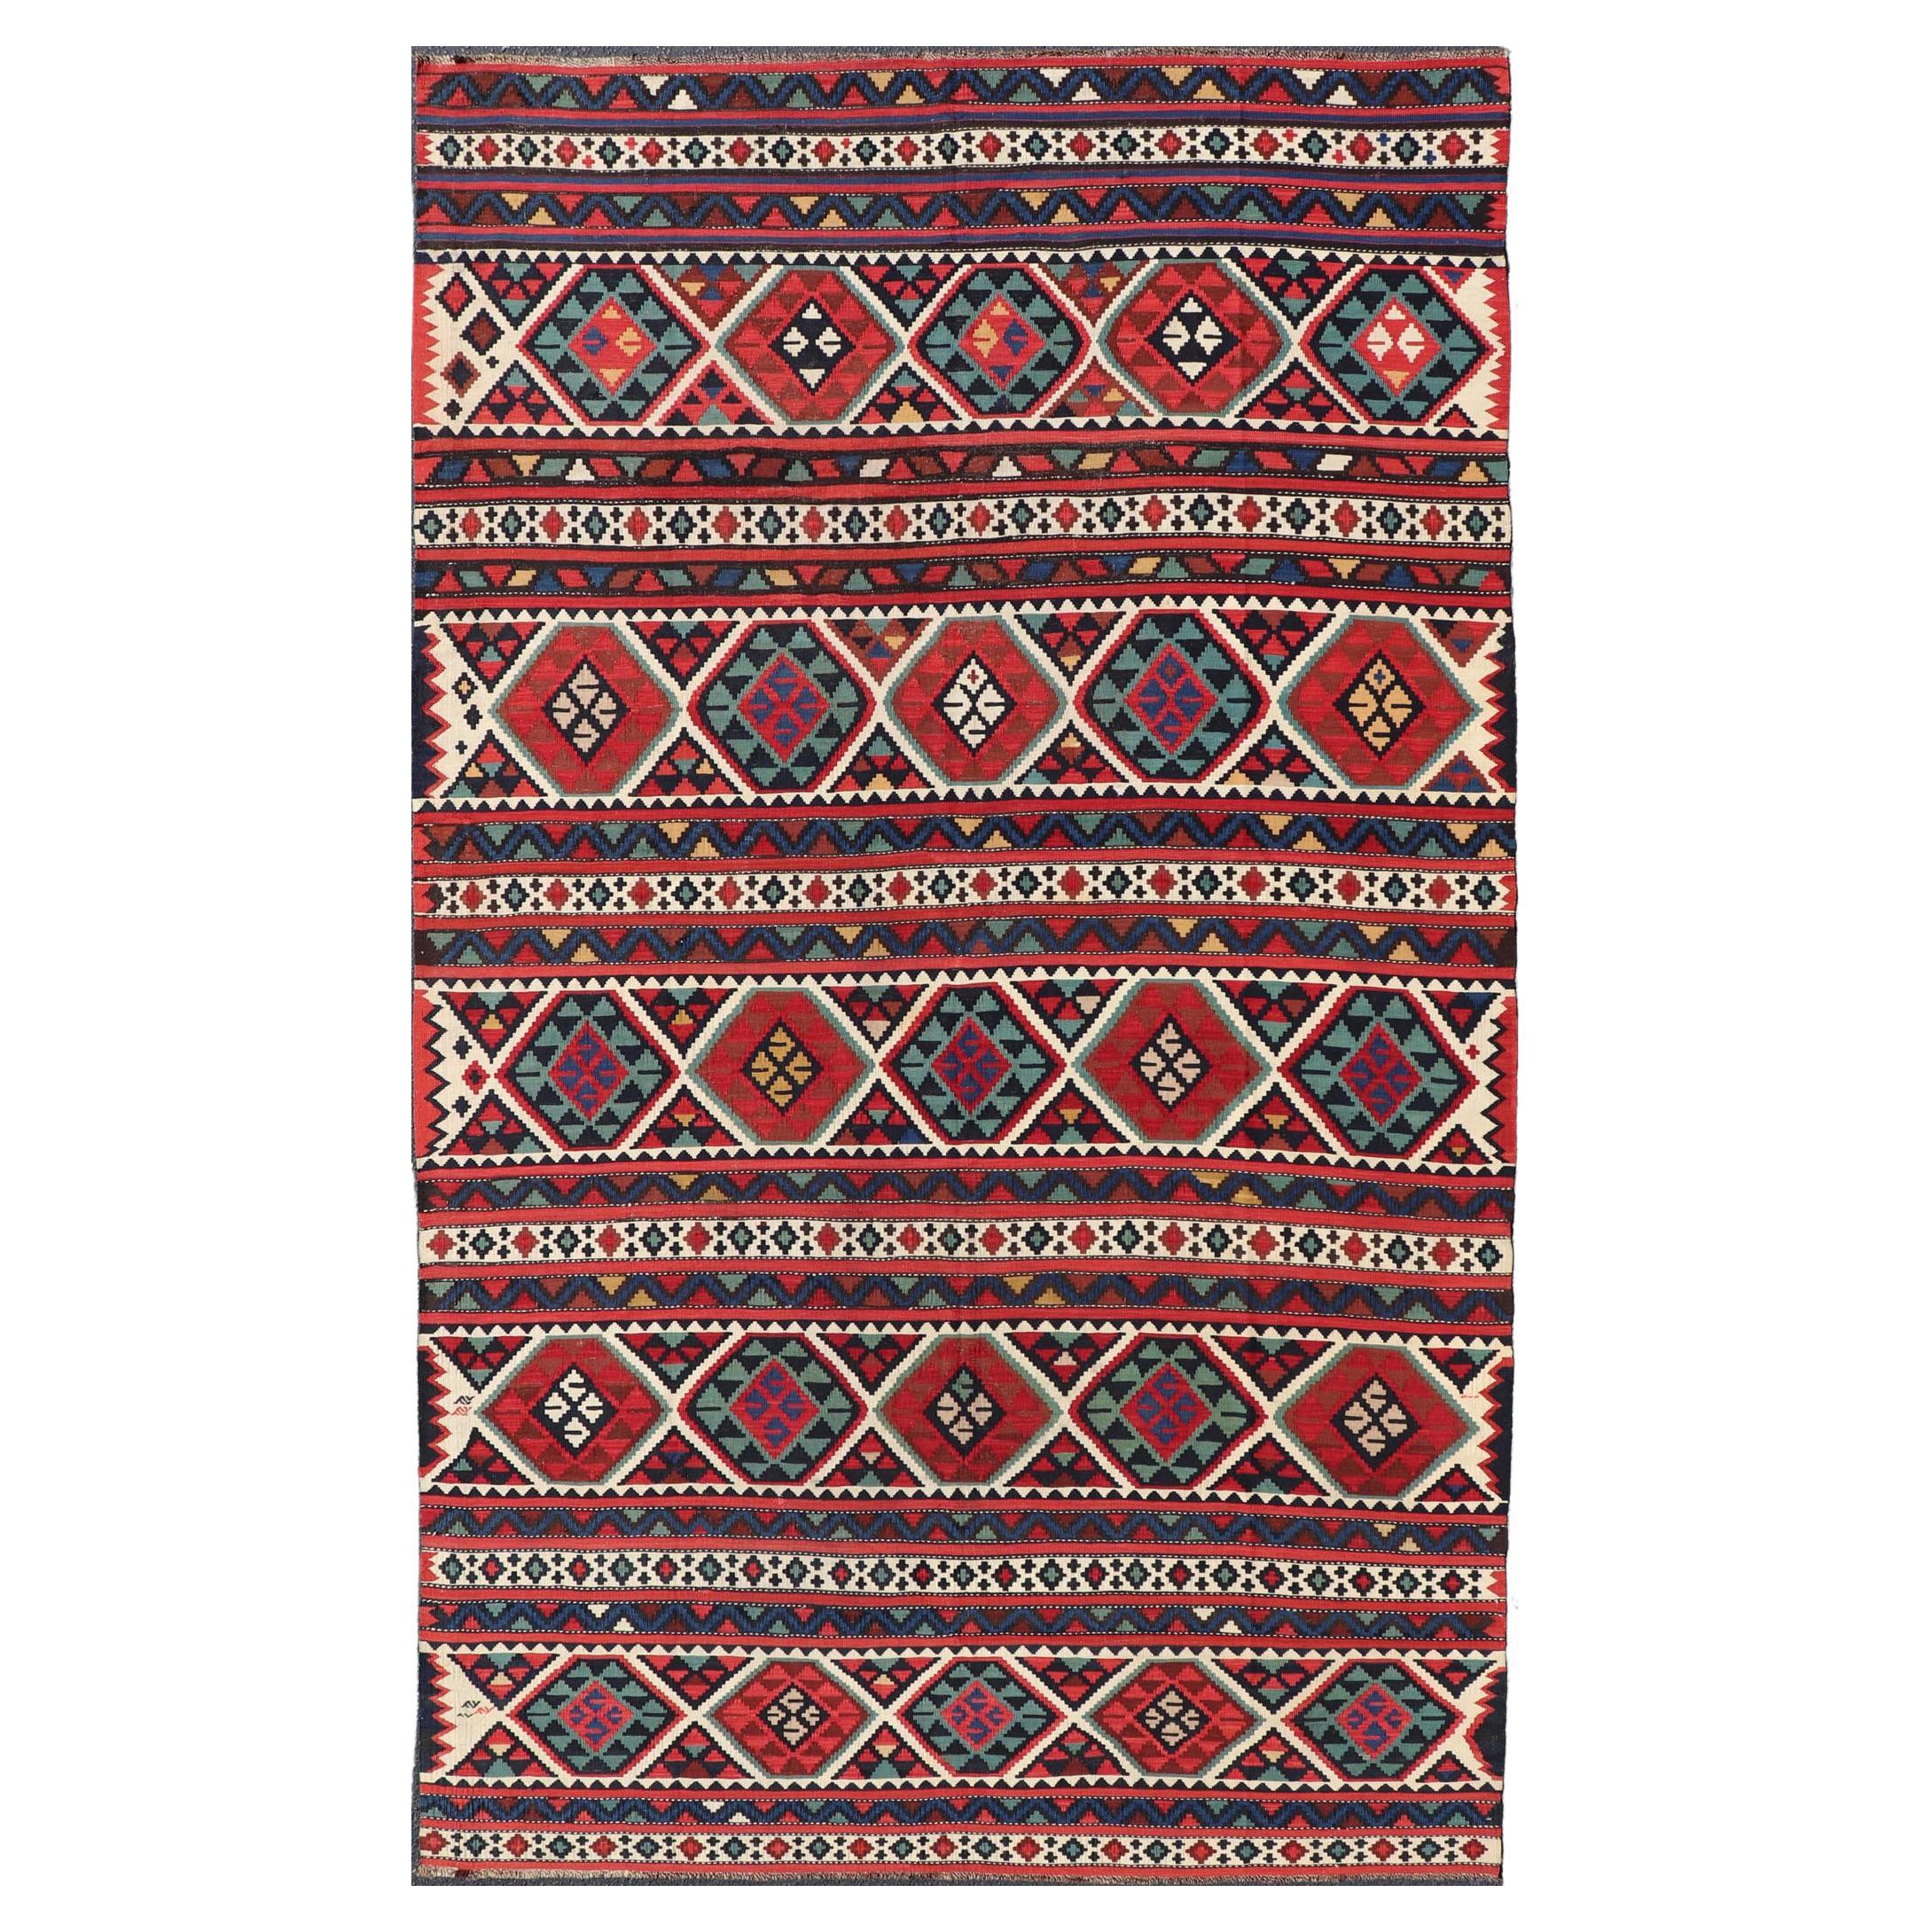 19th Century Antique Shirvan Kilim with Intricate Design in with Vibrant Colors For Sale